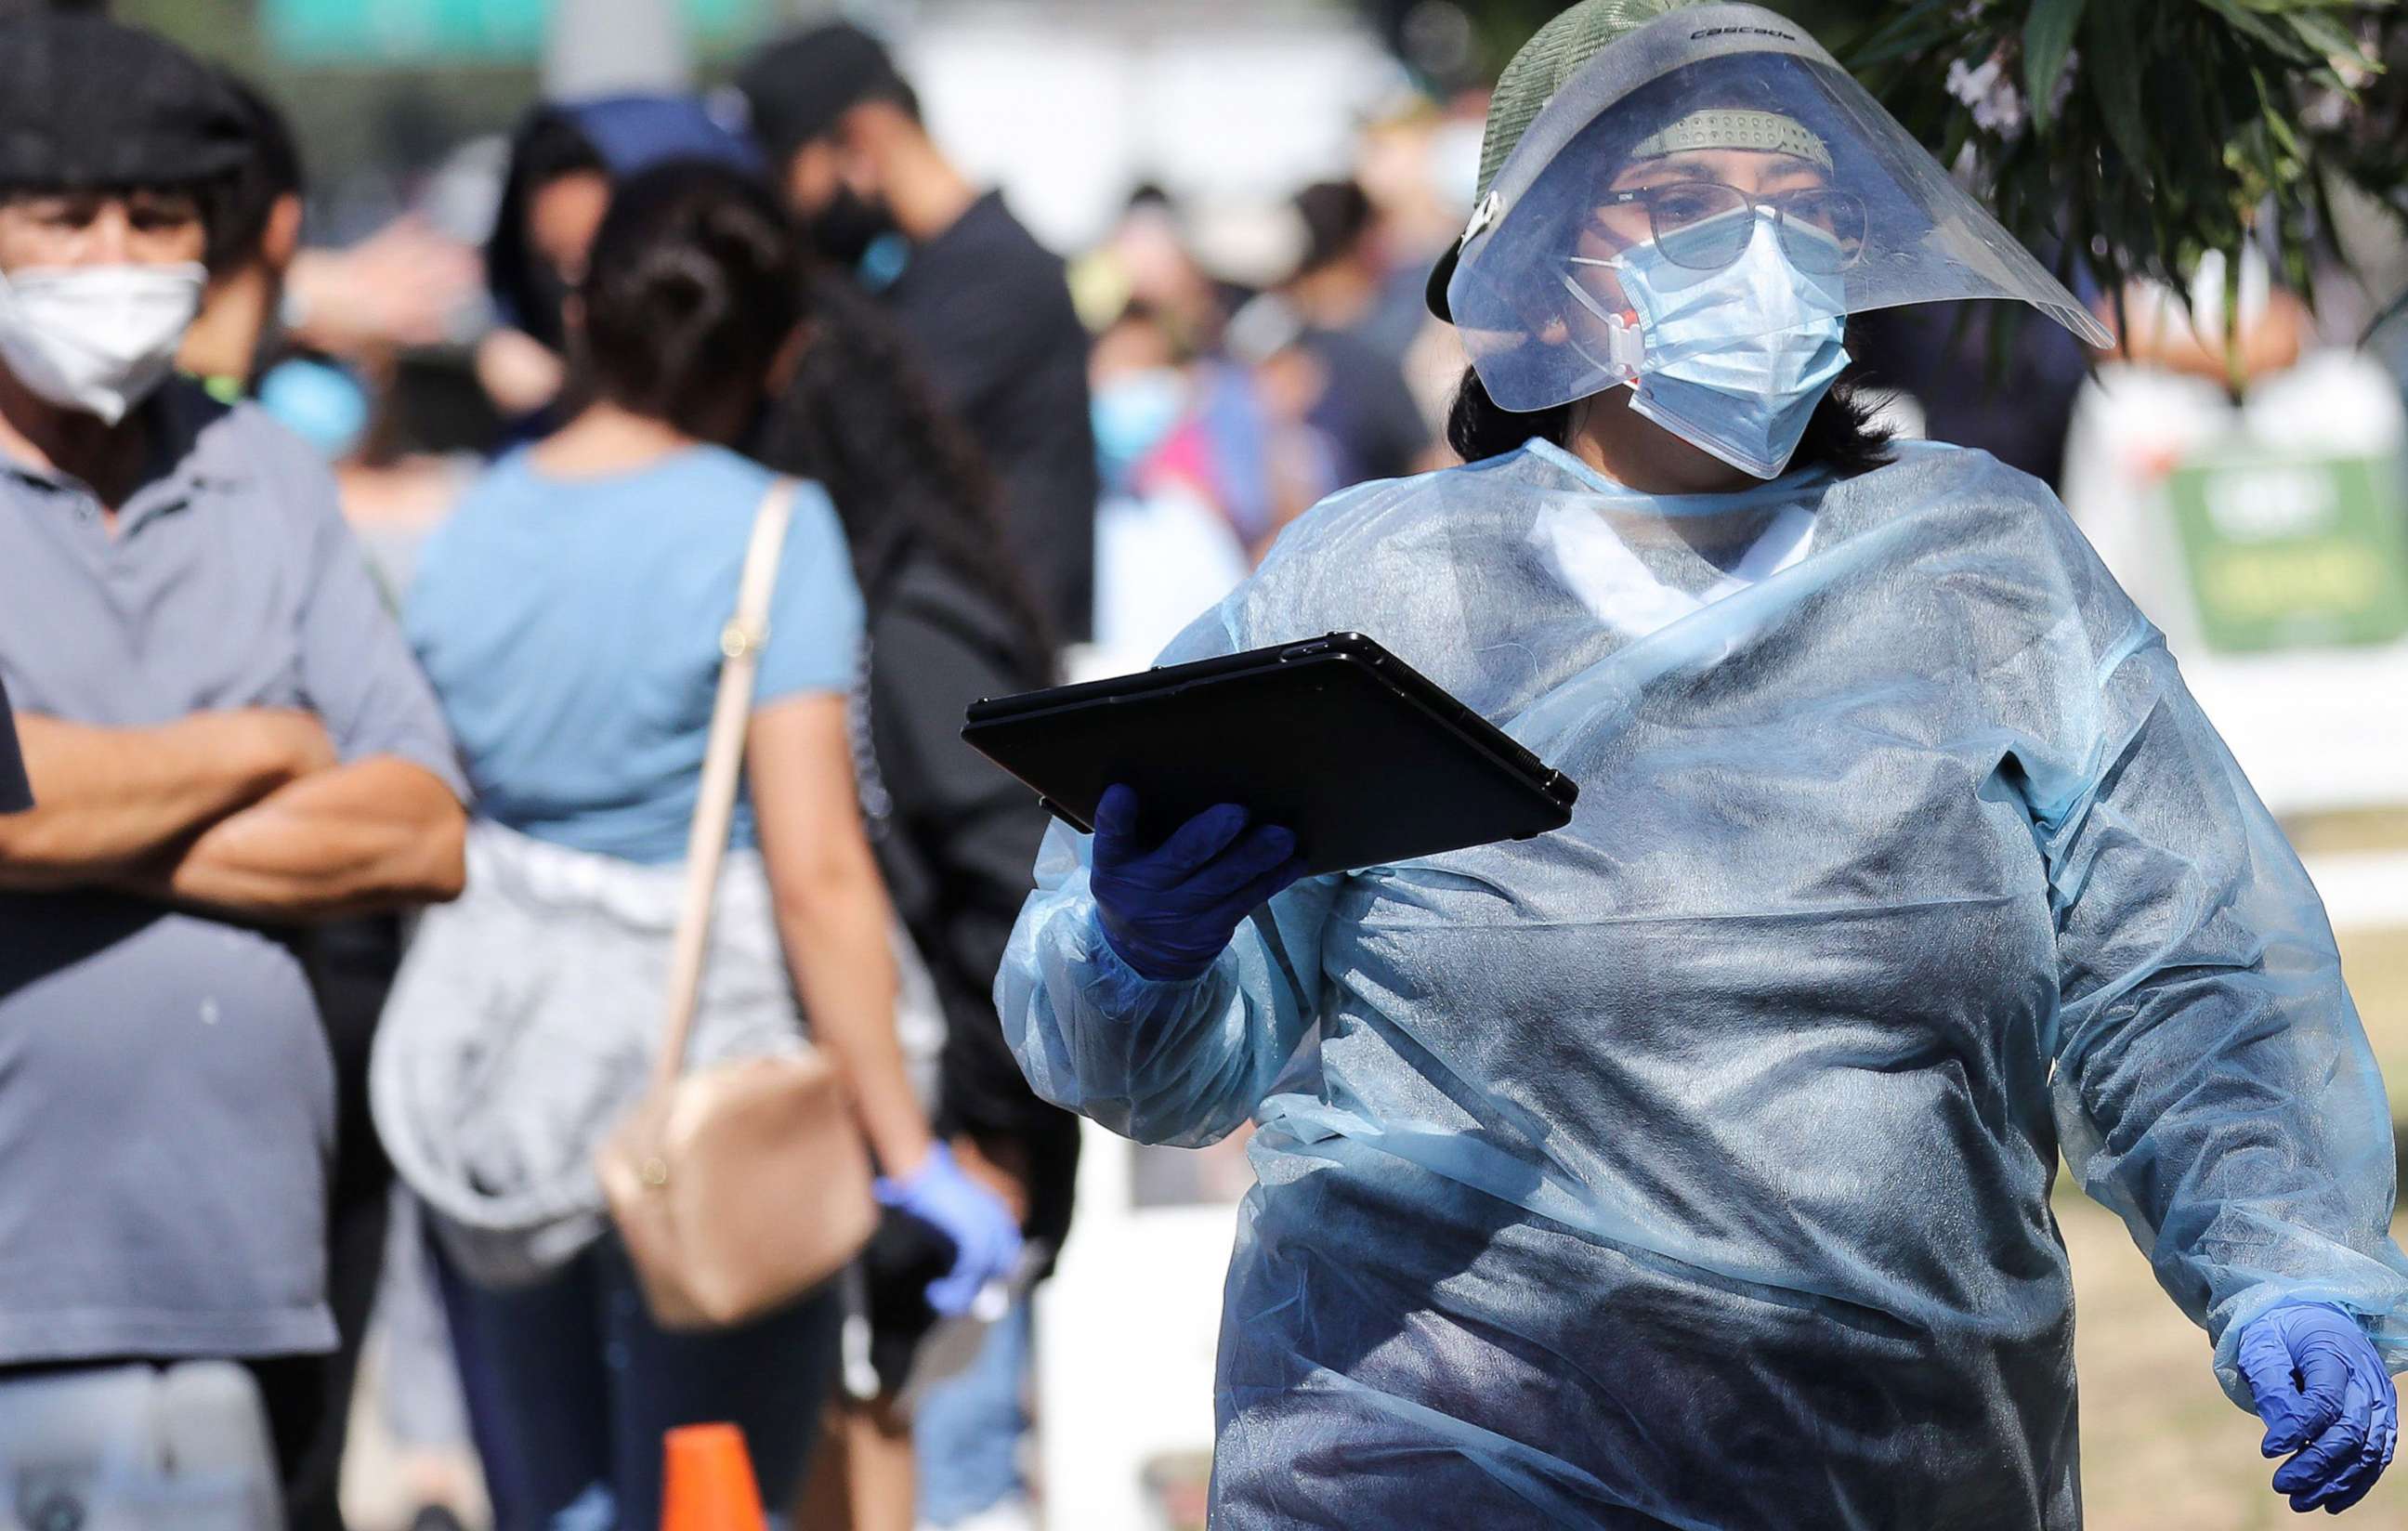 PHOTO: A worker in personal protective equipment (PPE) helps check in people at a COVID-19 testing center at Lincoln Park, July 7, 2020 in Los Angeles, during a spike in new coronavirus cases in California.